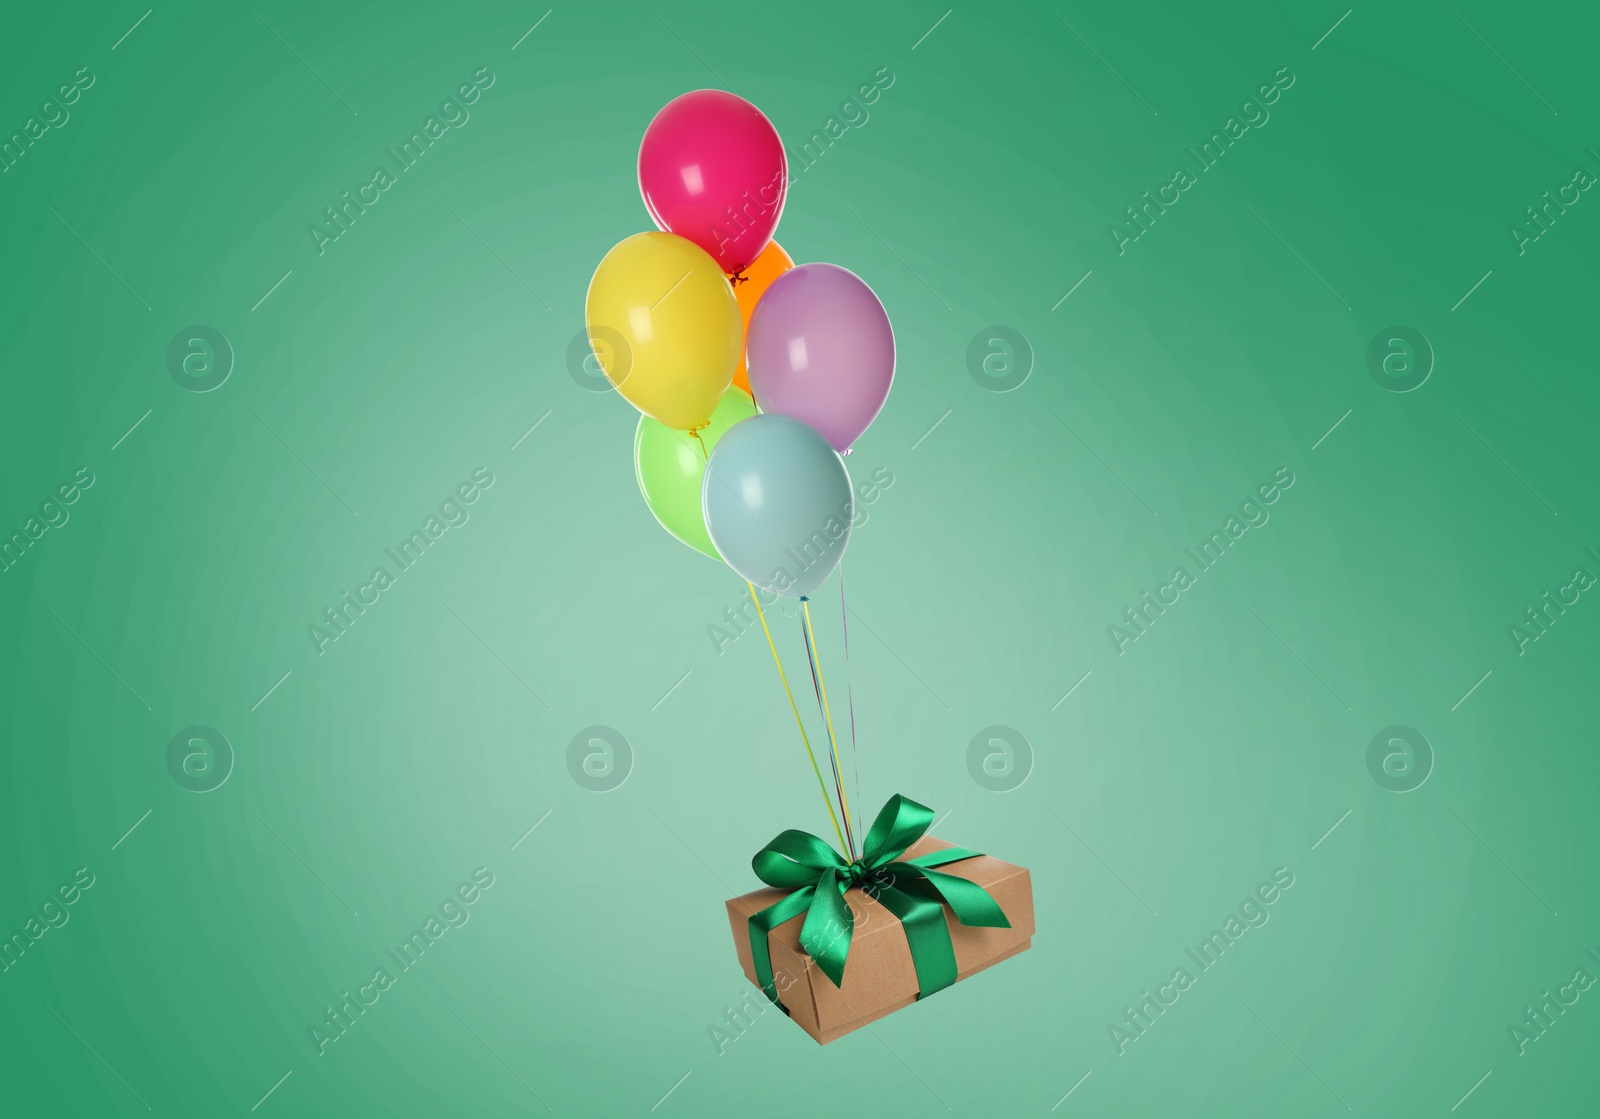 Image of Many balloons tied to gift box on sea green background